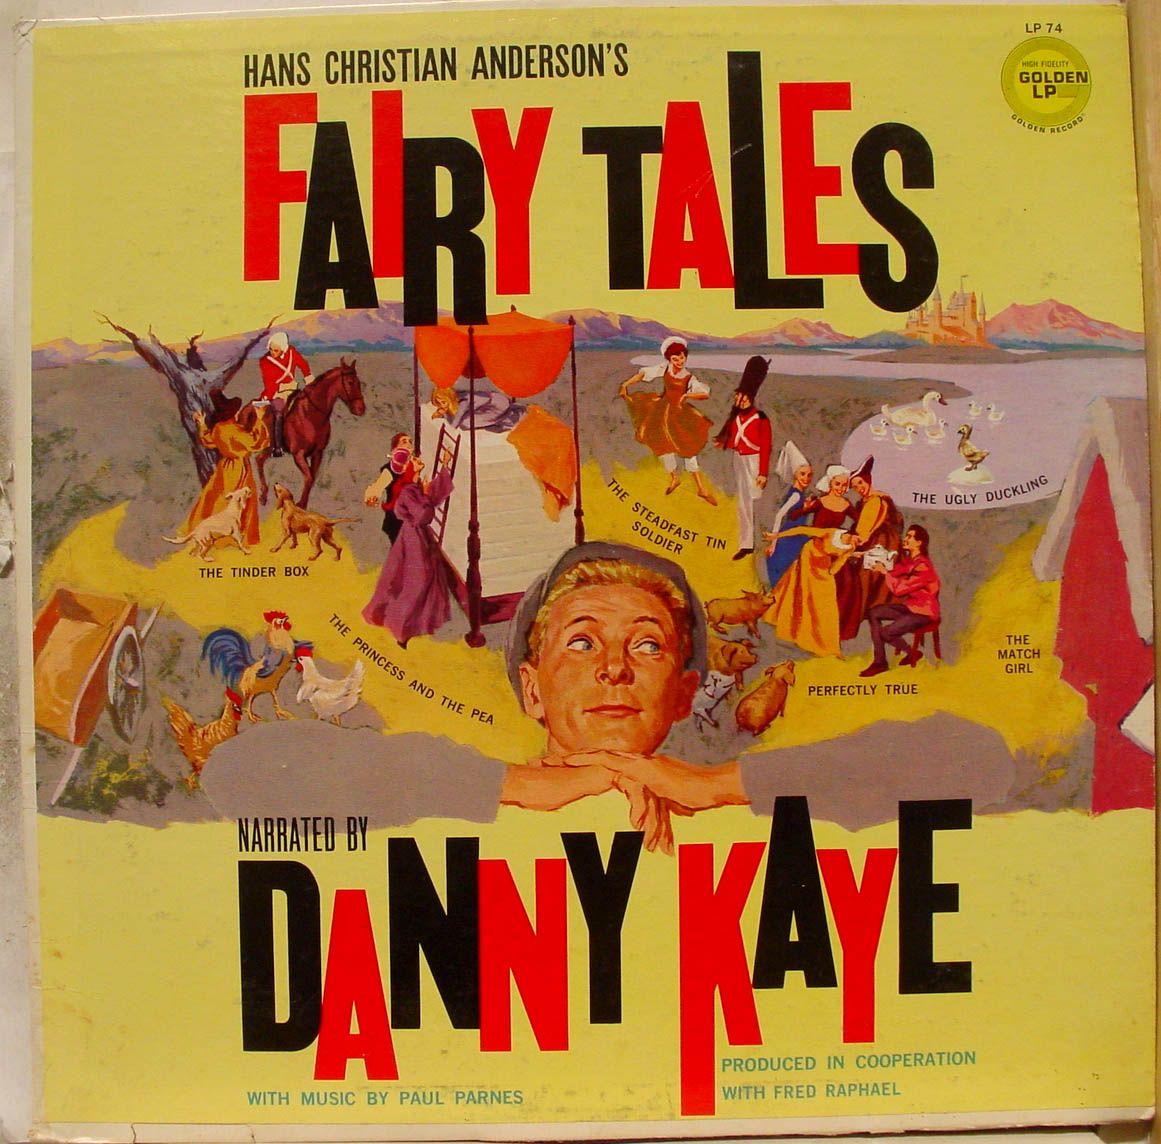 danny kaye hans christian anderson fairy tales label golden records